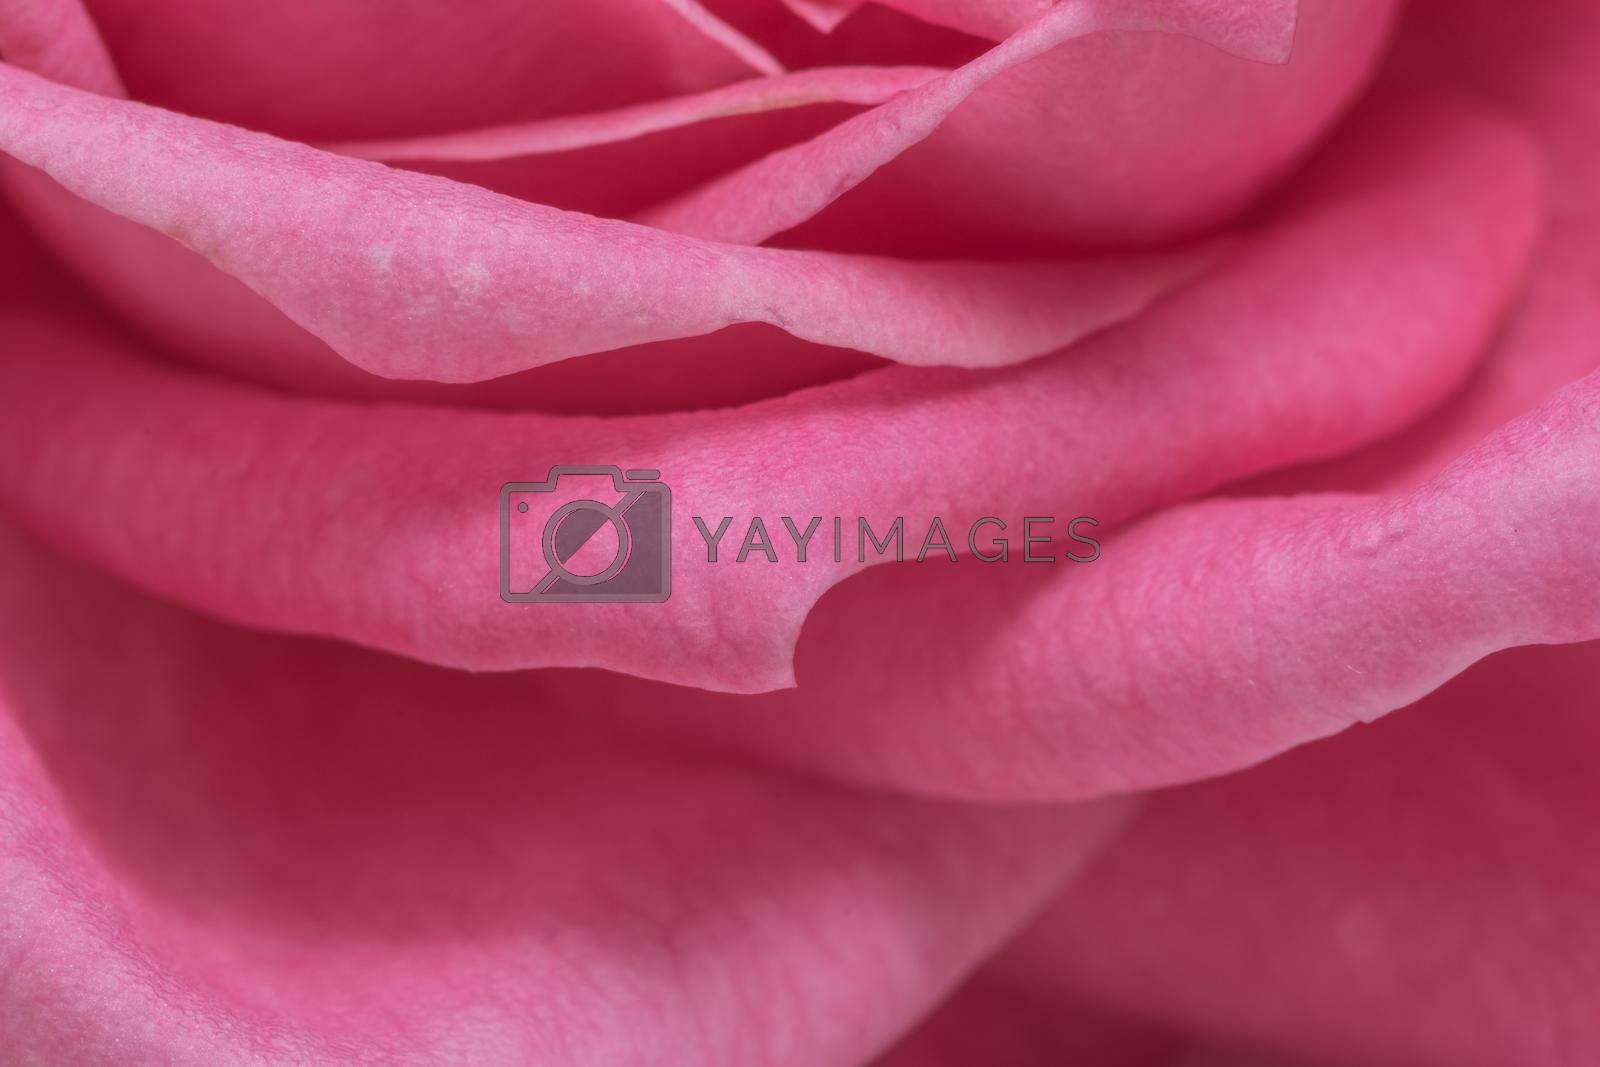 Royalty free image of Pink rose petals background by yayimage